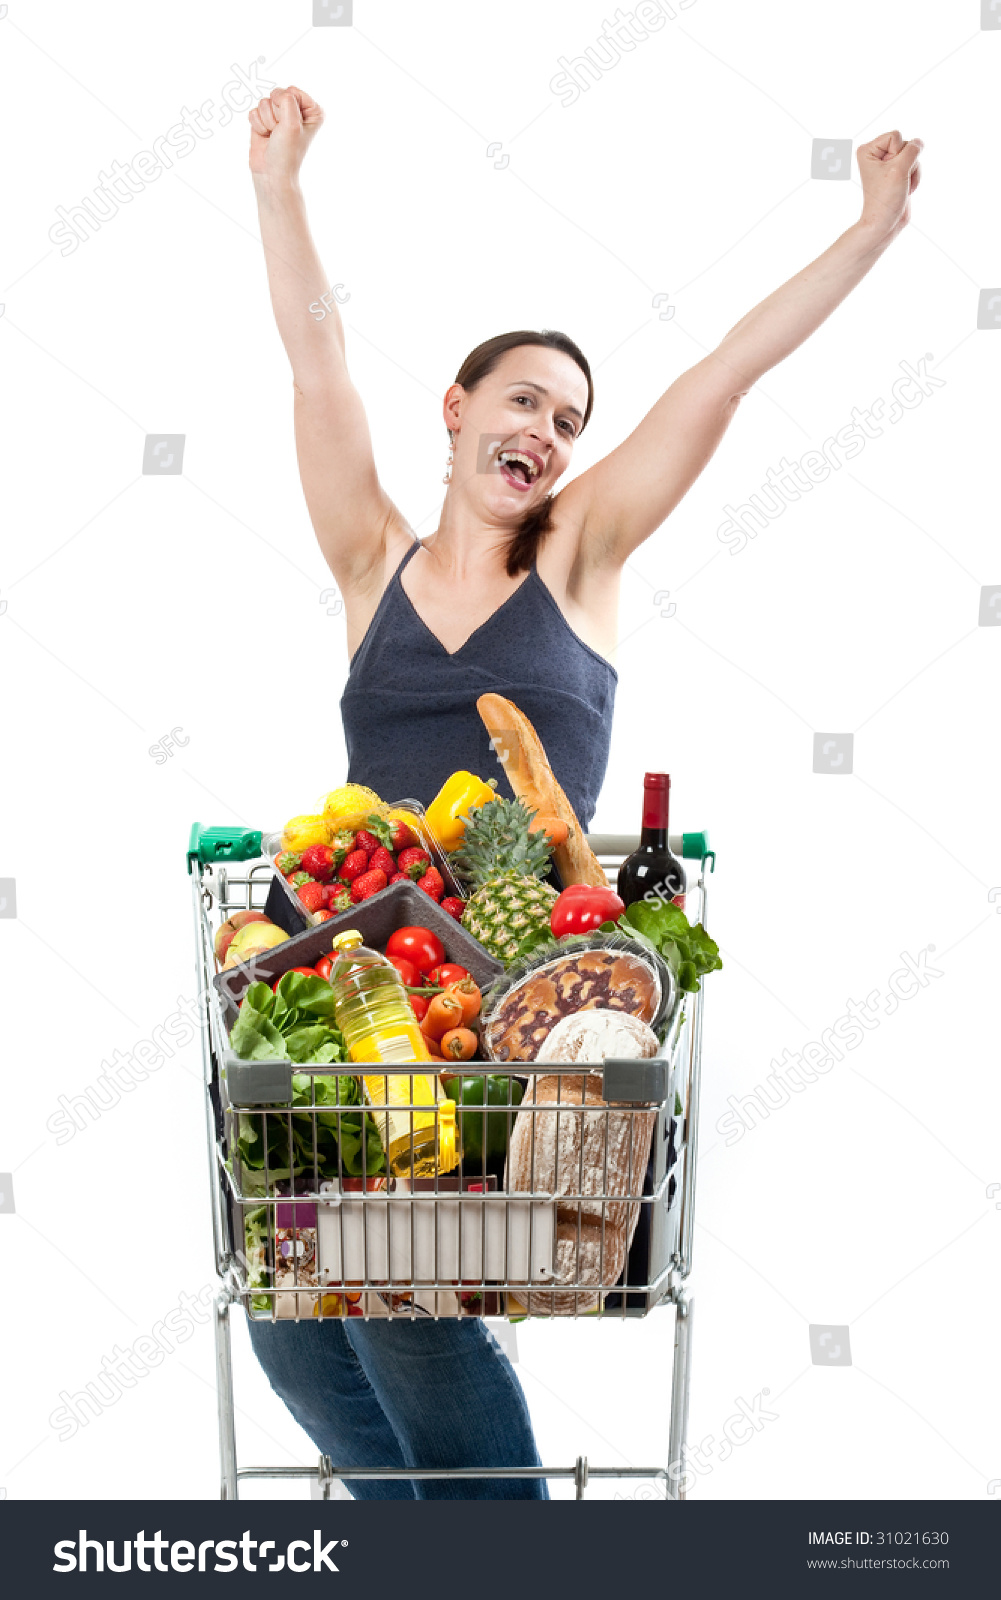 A woman with a full shopping cart happy to be shopping - punching the air on a white background #31021630